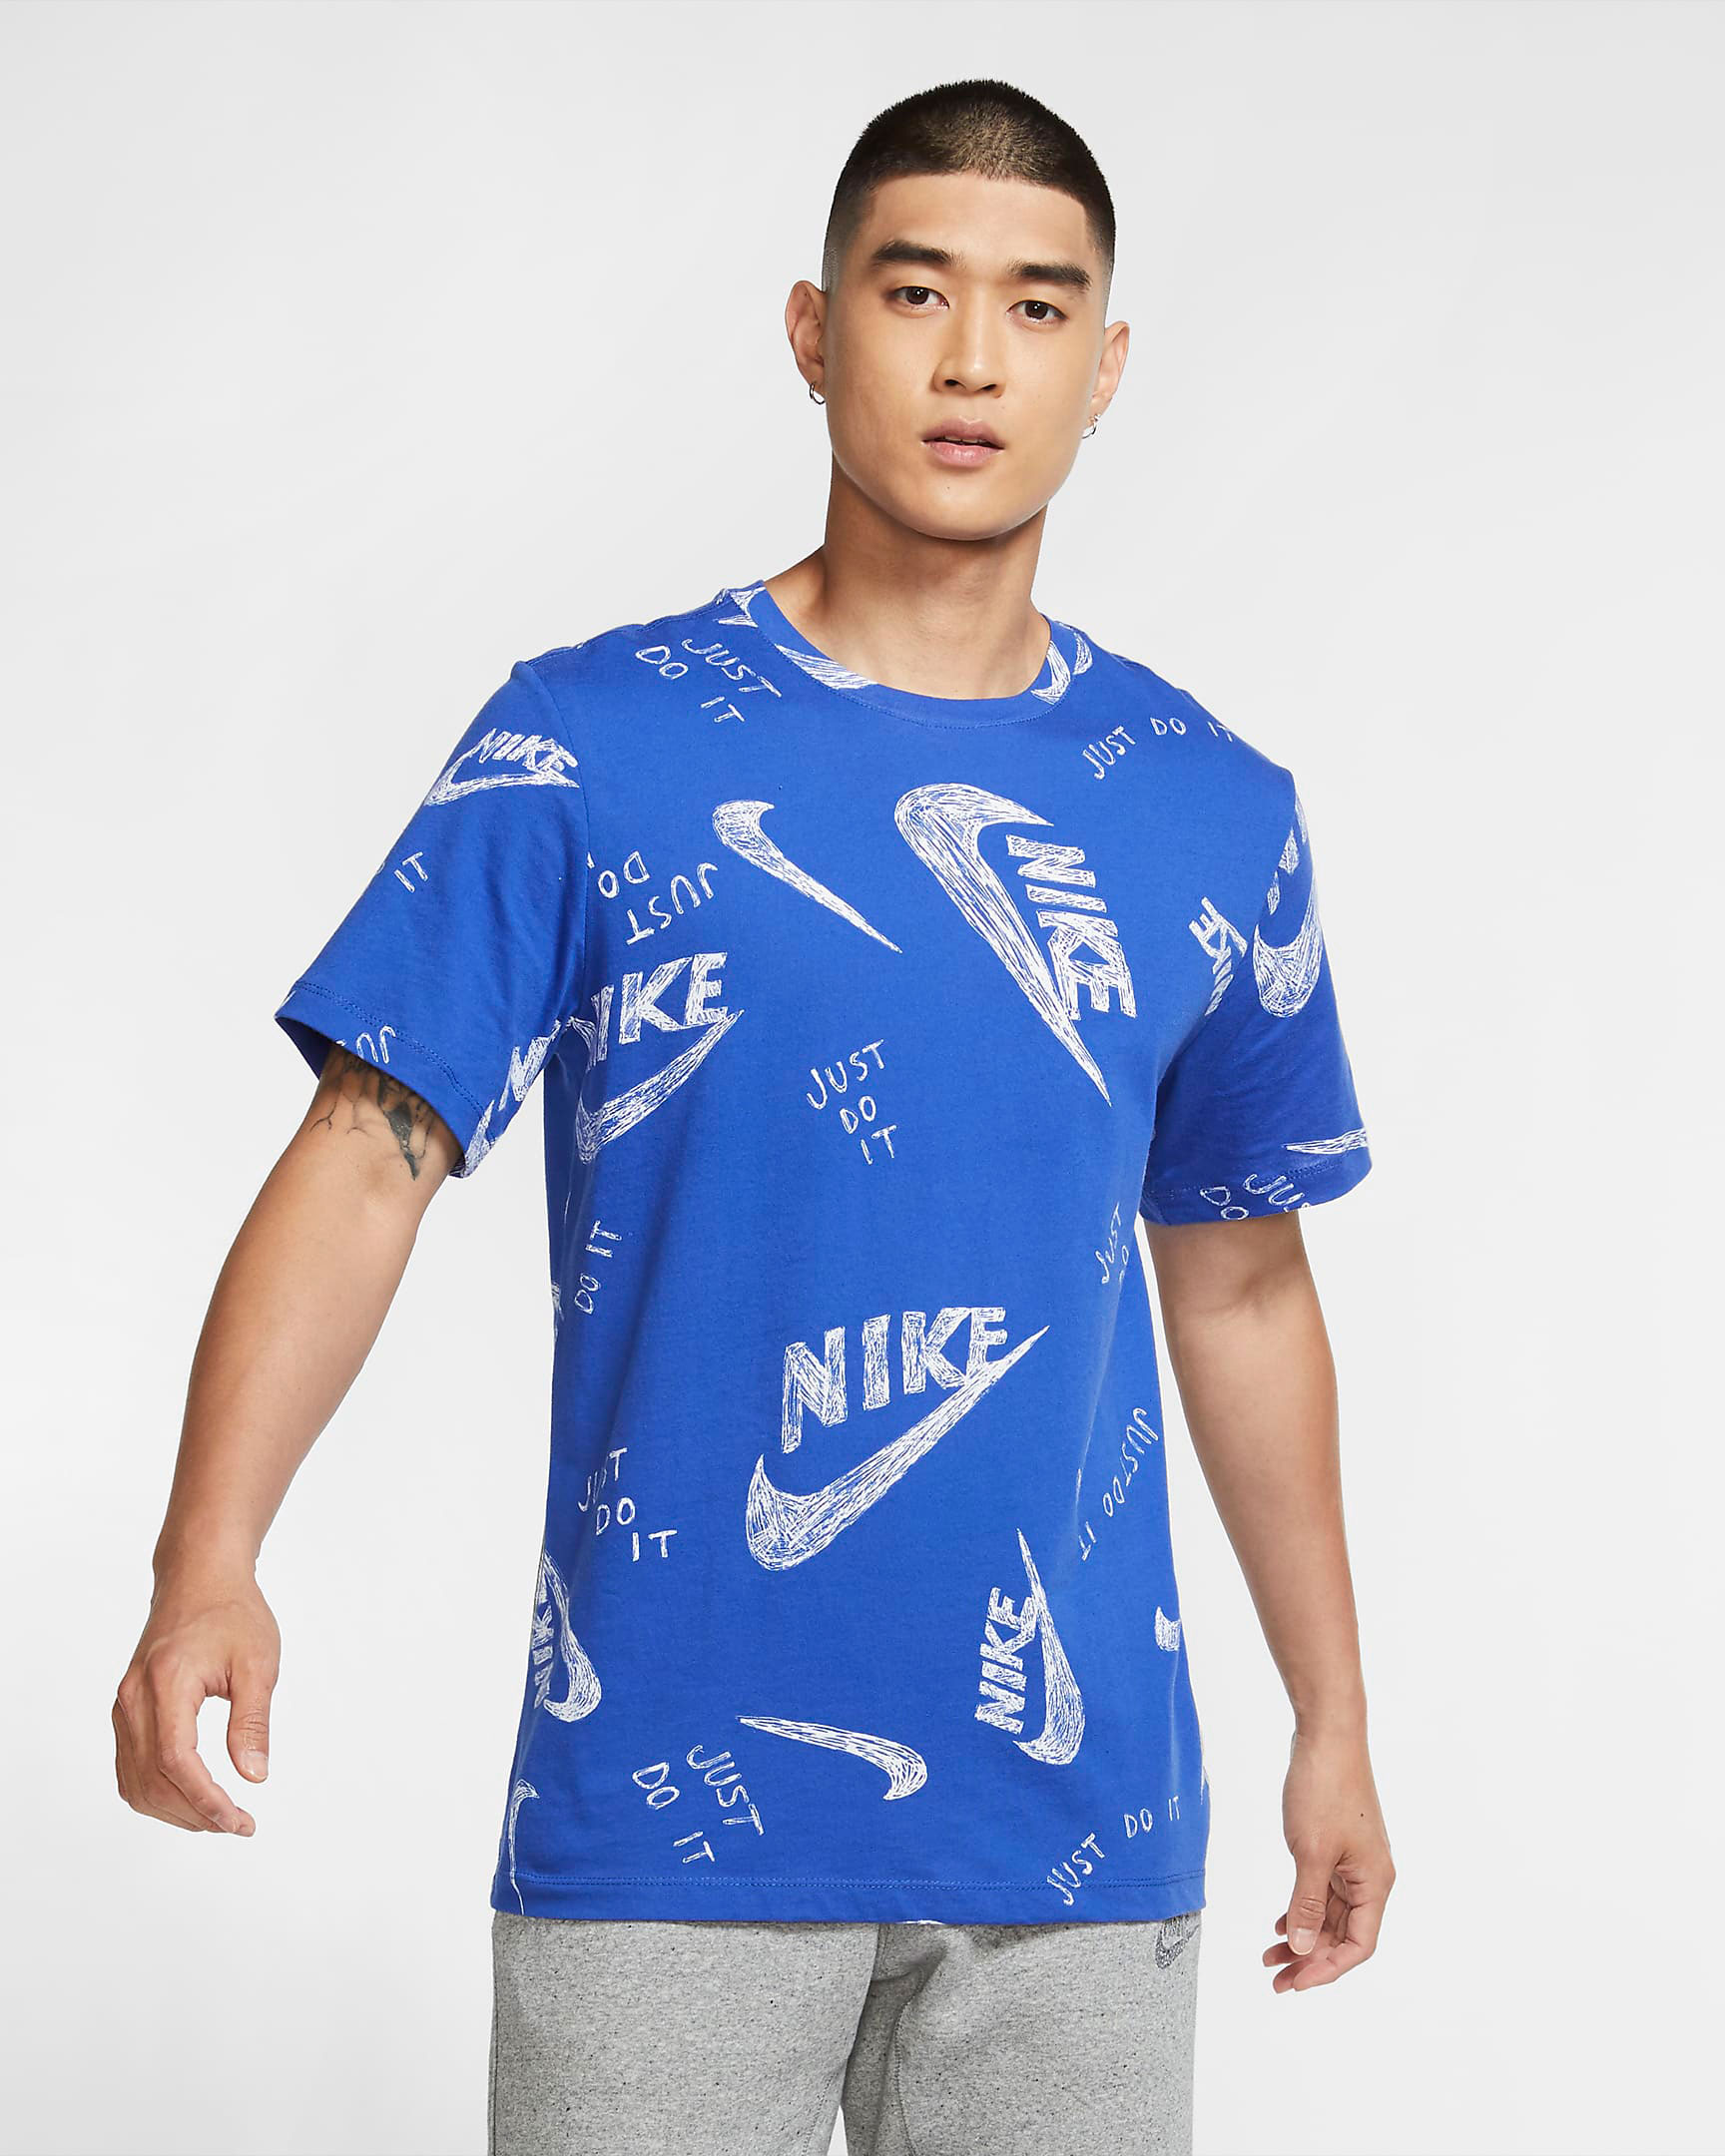 Nike Foamposite 96 All Star Shirts Hats Clothing Match | SneakerFits.com